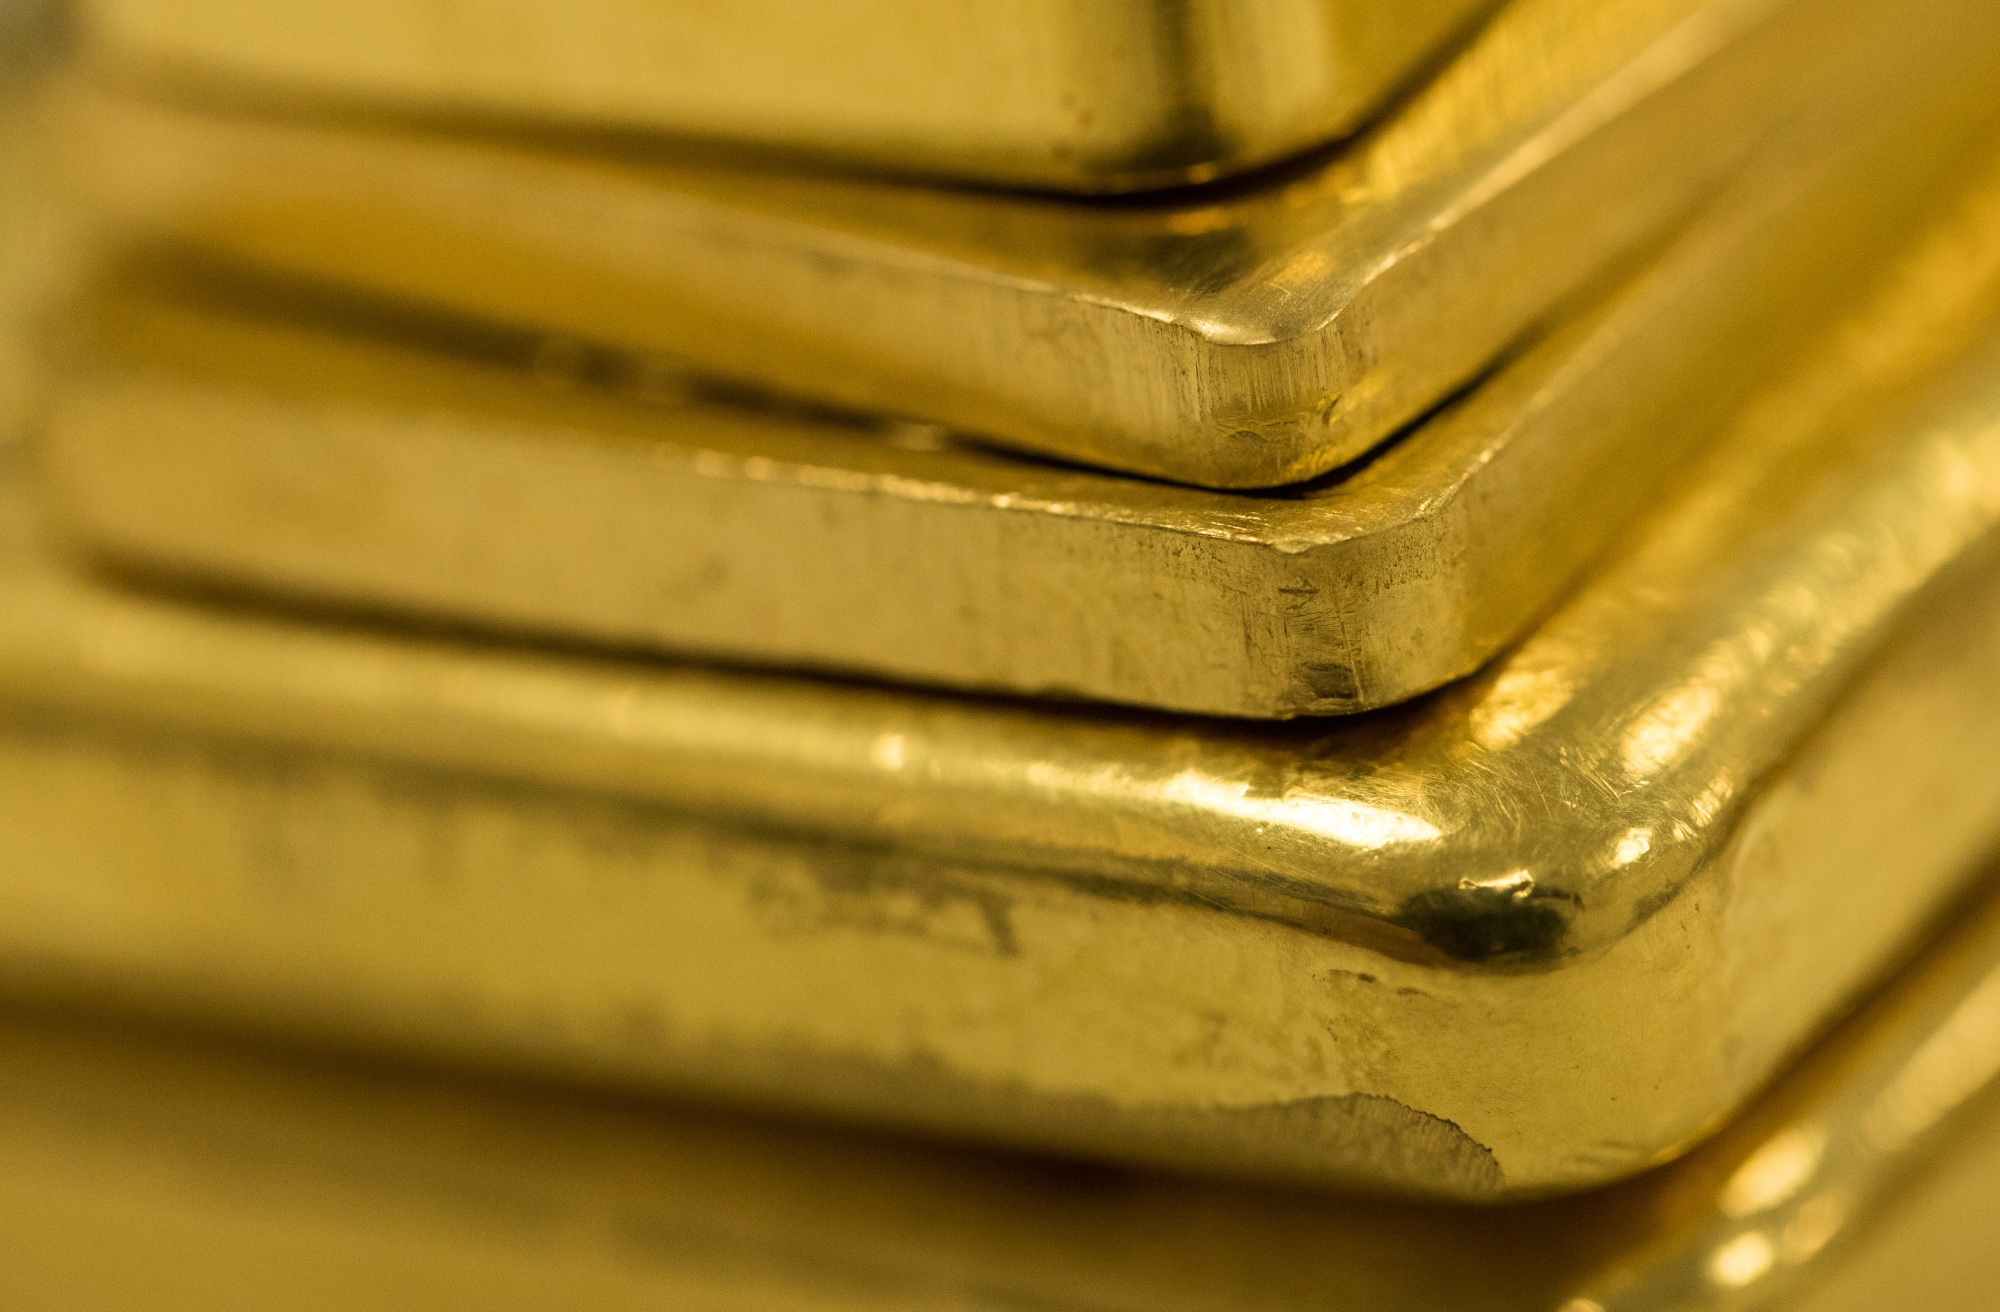 Gold Silver Rate Today: Bullion prices mixed in spot, futures gain